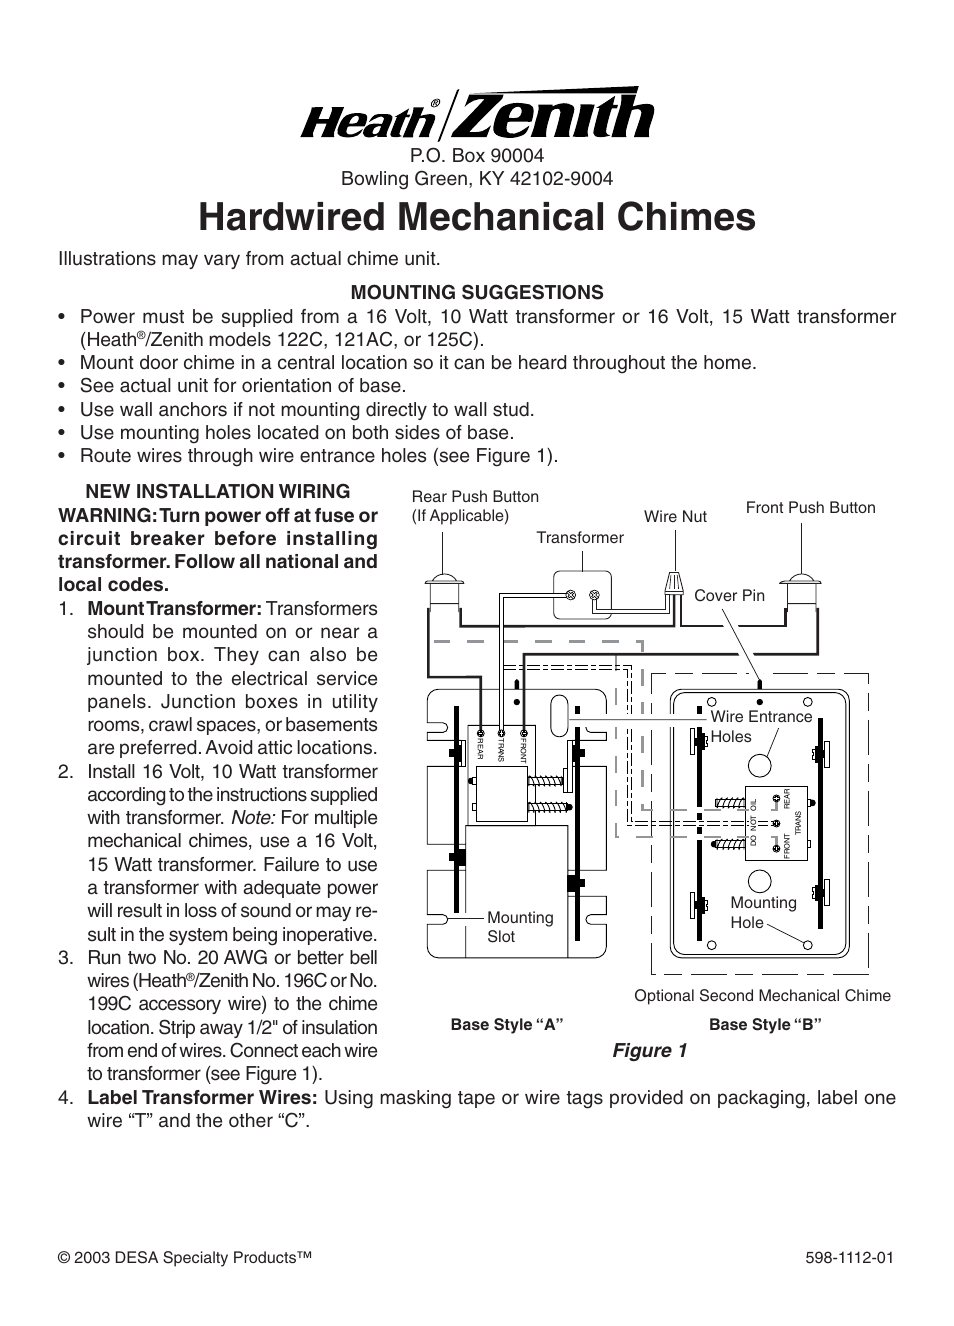 How To Install Heath Zenith Wired Door Chime Transformer